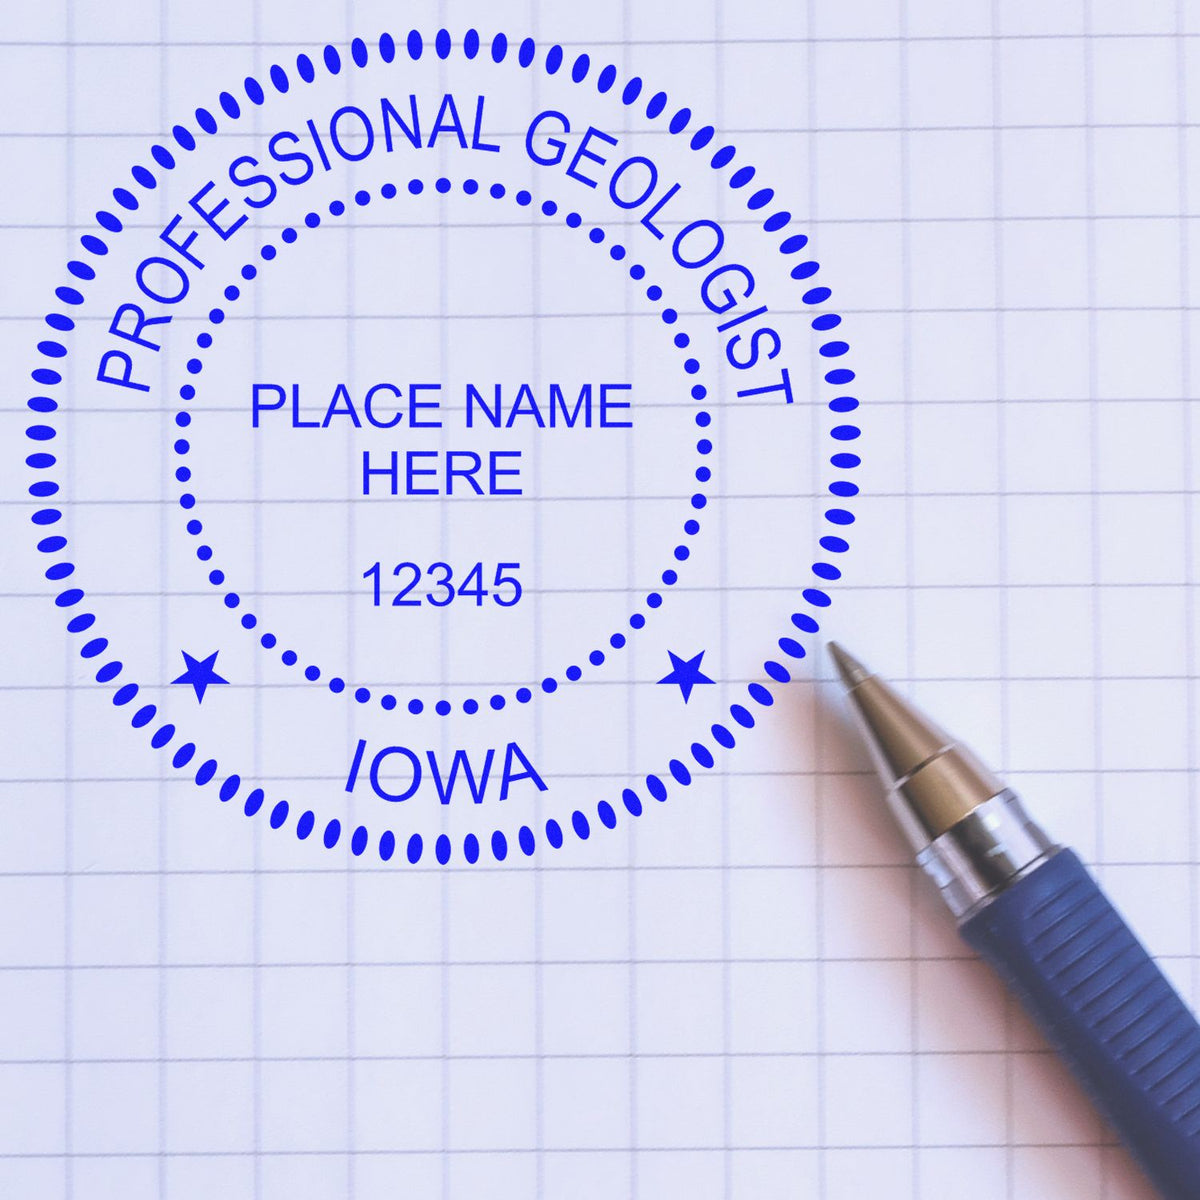 An alternative view of the Digital Iowa Geologist Stamp, Electronic Seal for Iowa Geologist stamped on a sheet of paper showing the image in use